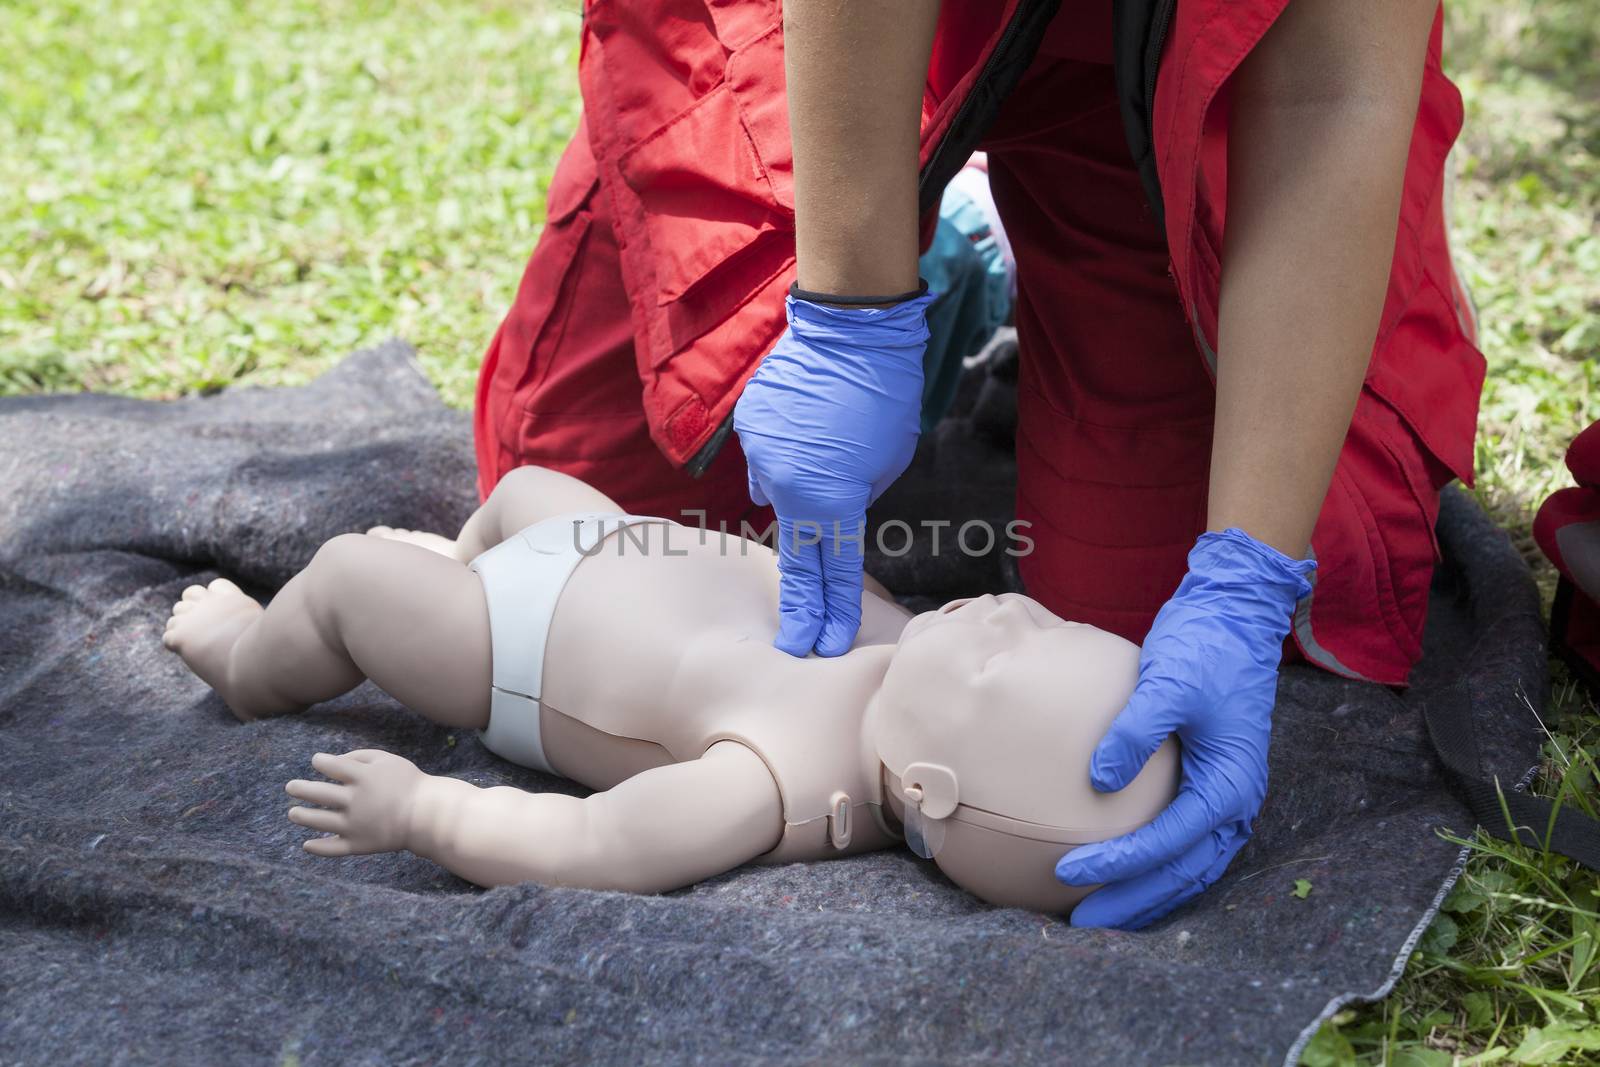 Baby first aid by wellphoto